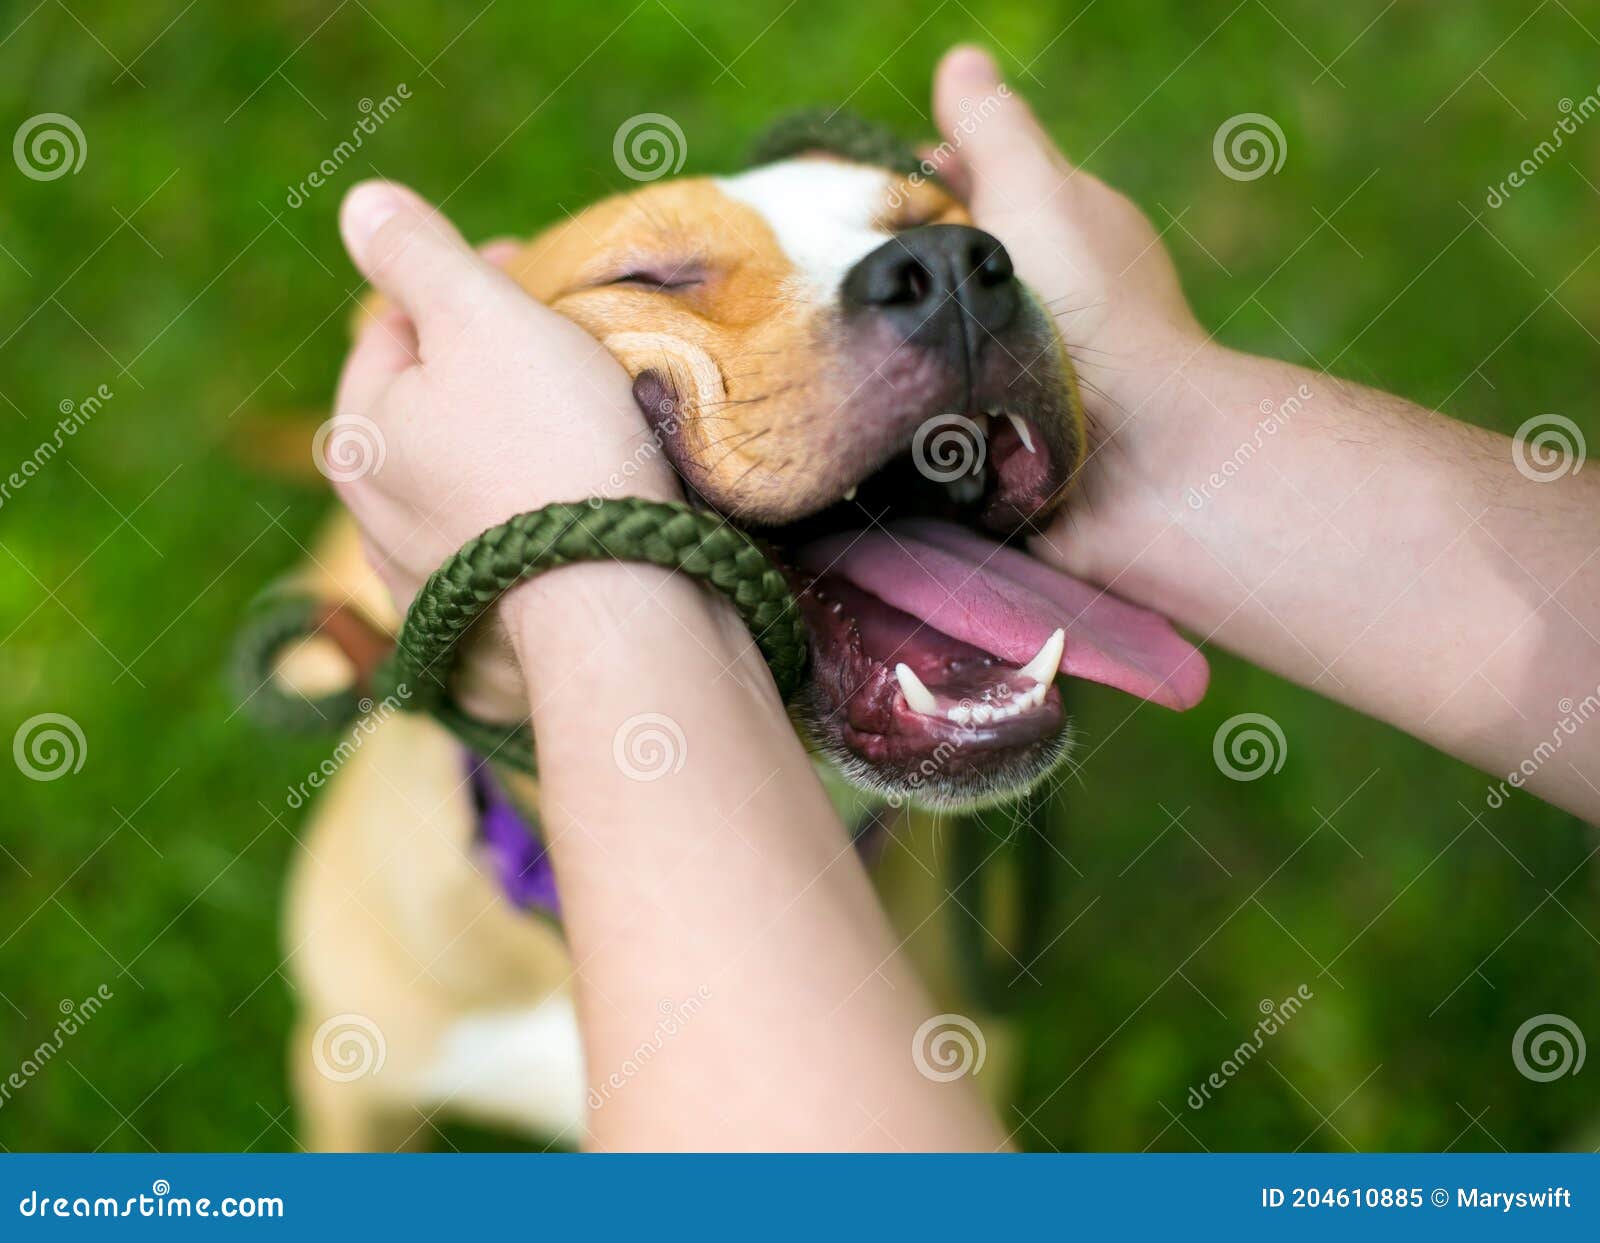 a person petting a happy pit bull terrier mixed breed dog